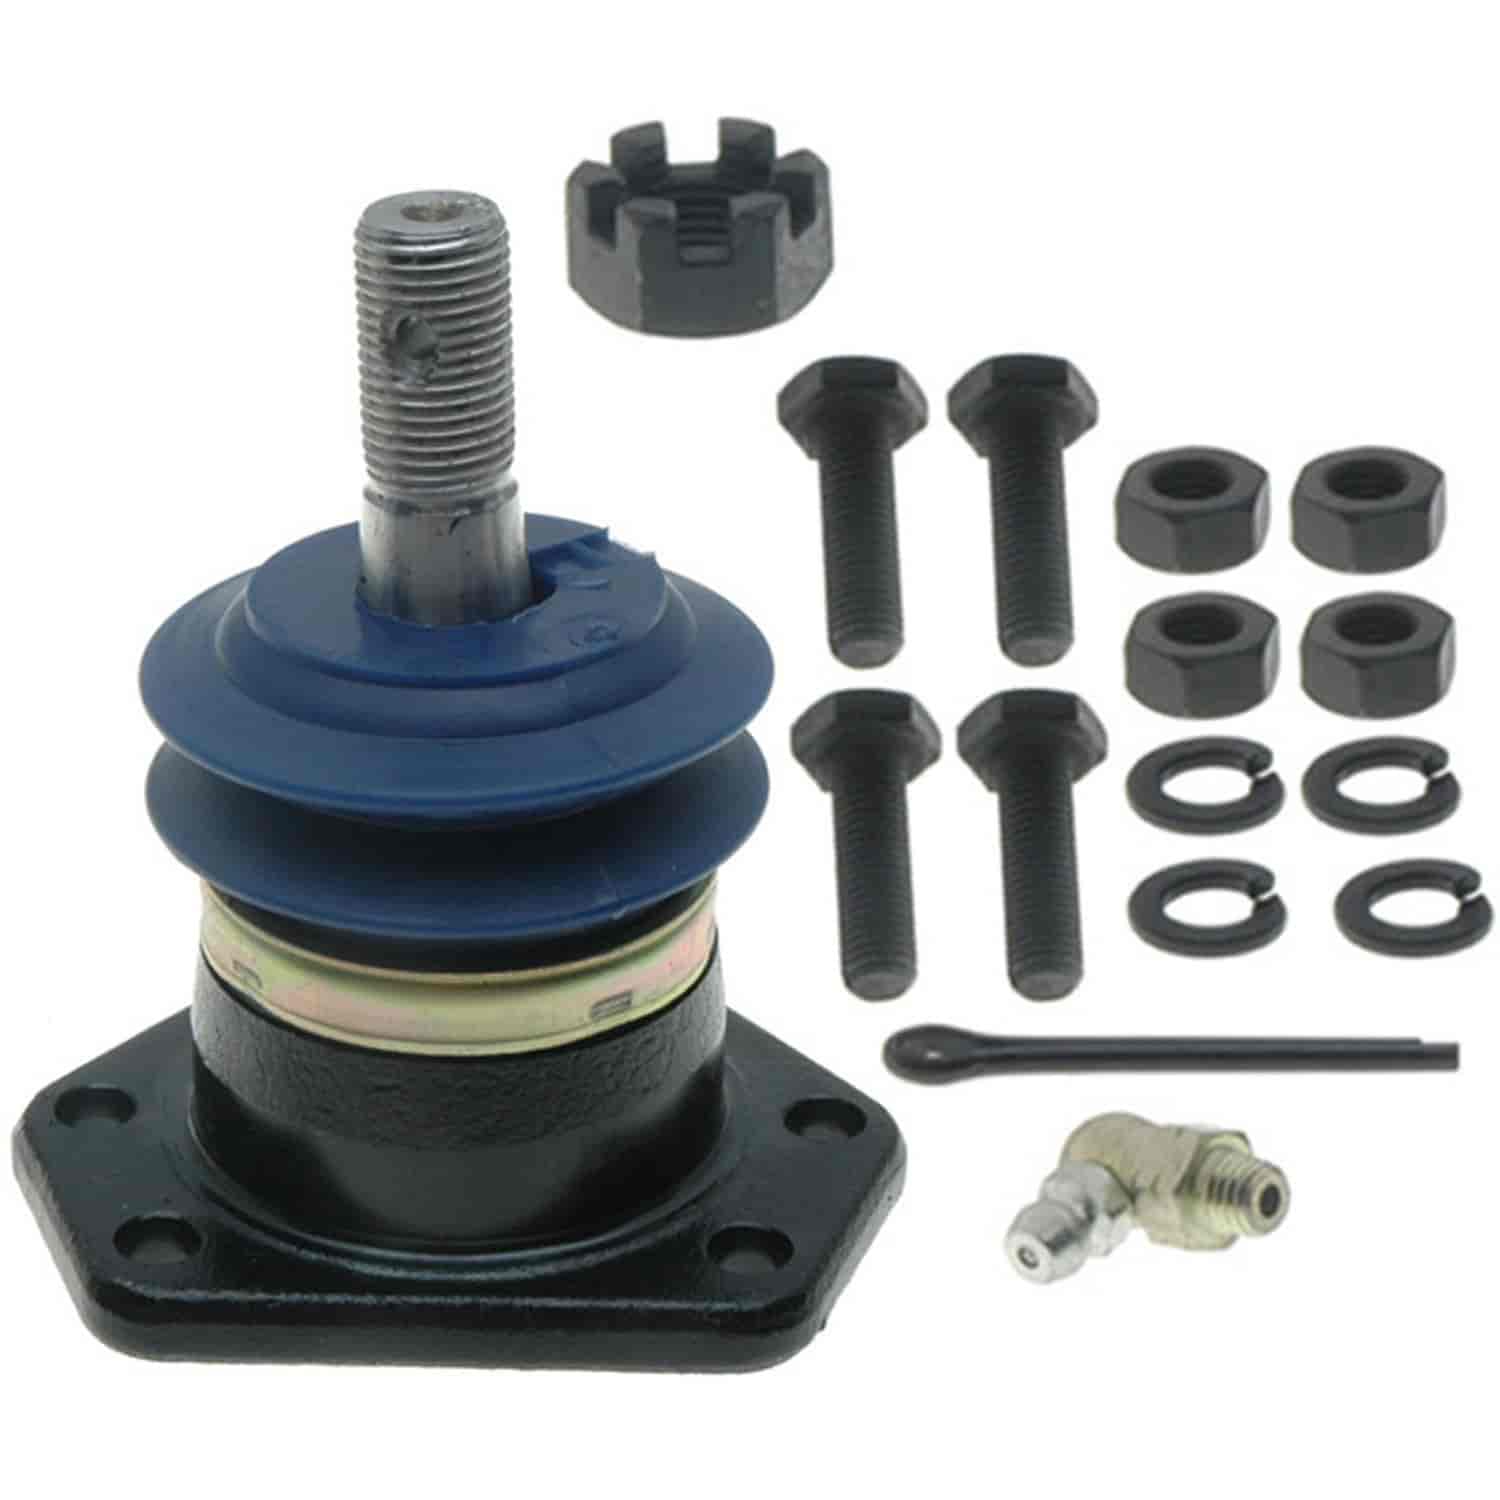 Front Upper Ball Joint Kit for Select 1971-2005 Buick, Cadillac, Chevrolet, GMC, Oldsmobile, Pontiac